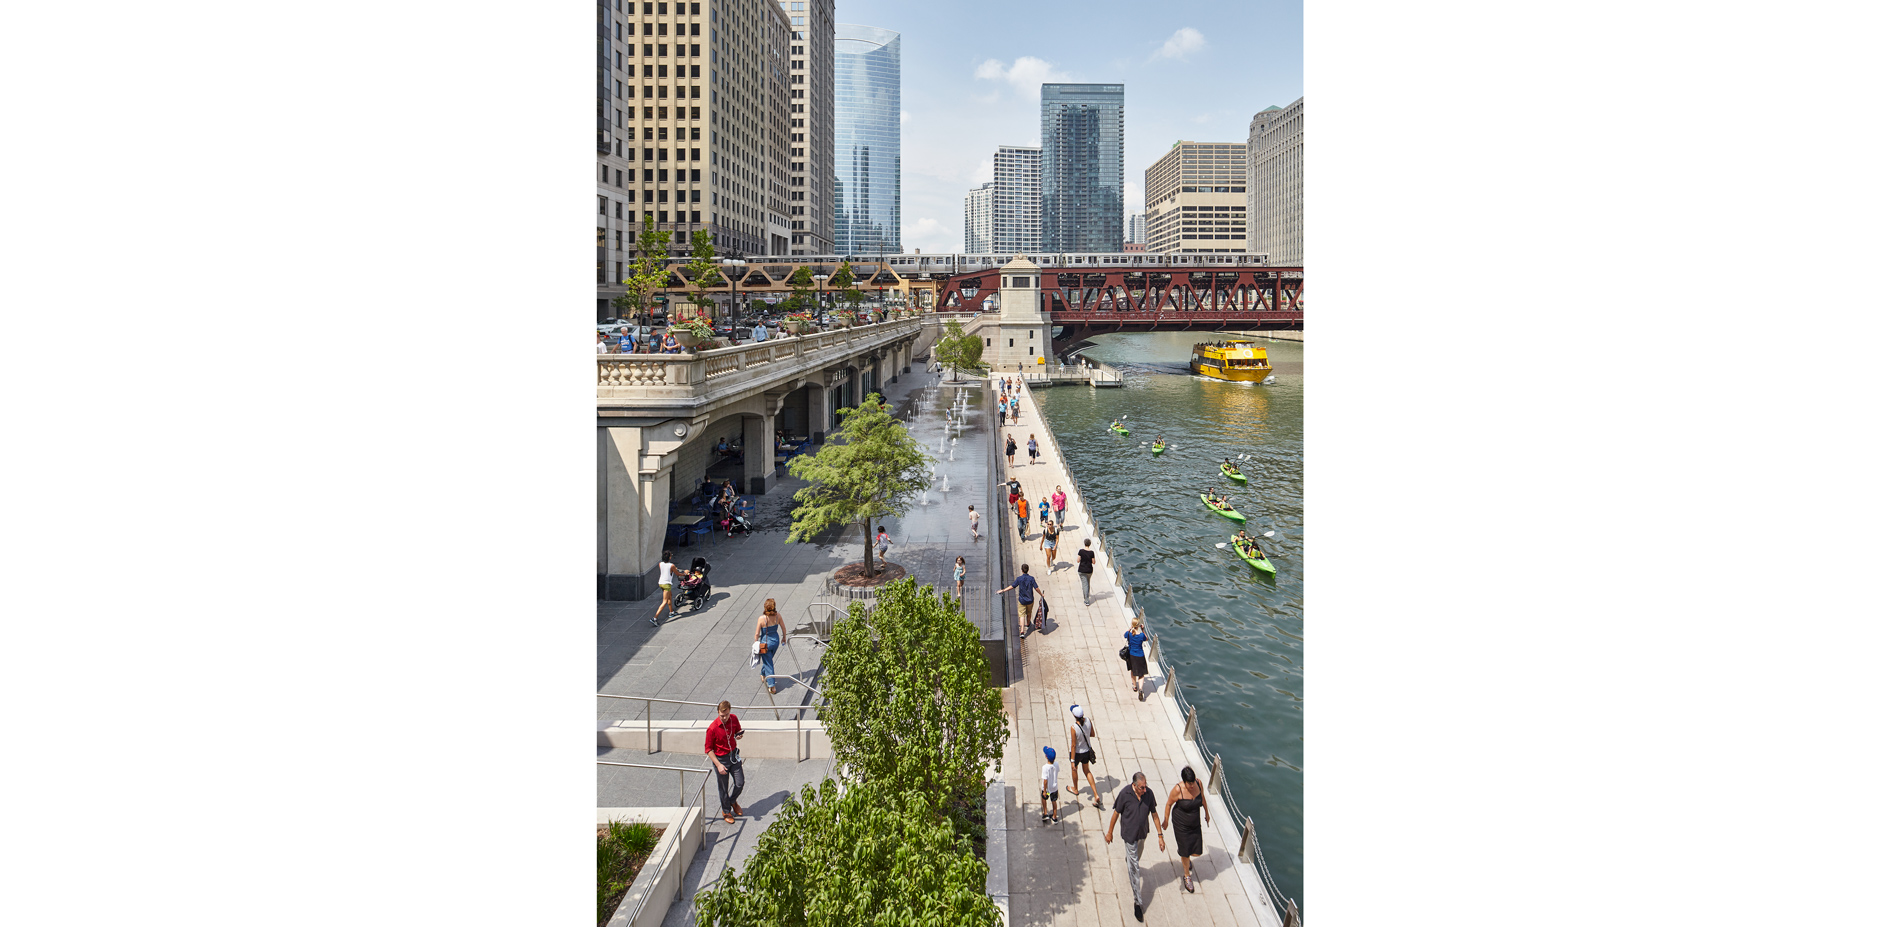 Activation of Public Space. Active, passive, and seasonal programming is enabled by the design’s built-in diversity and flexibility, including various…